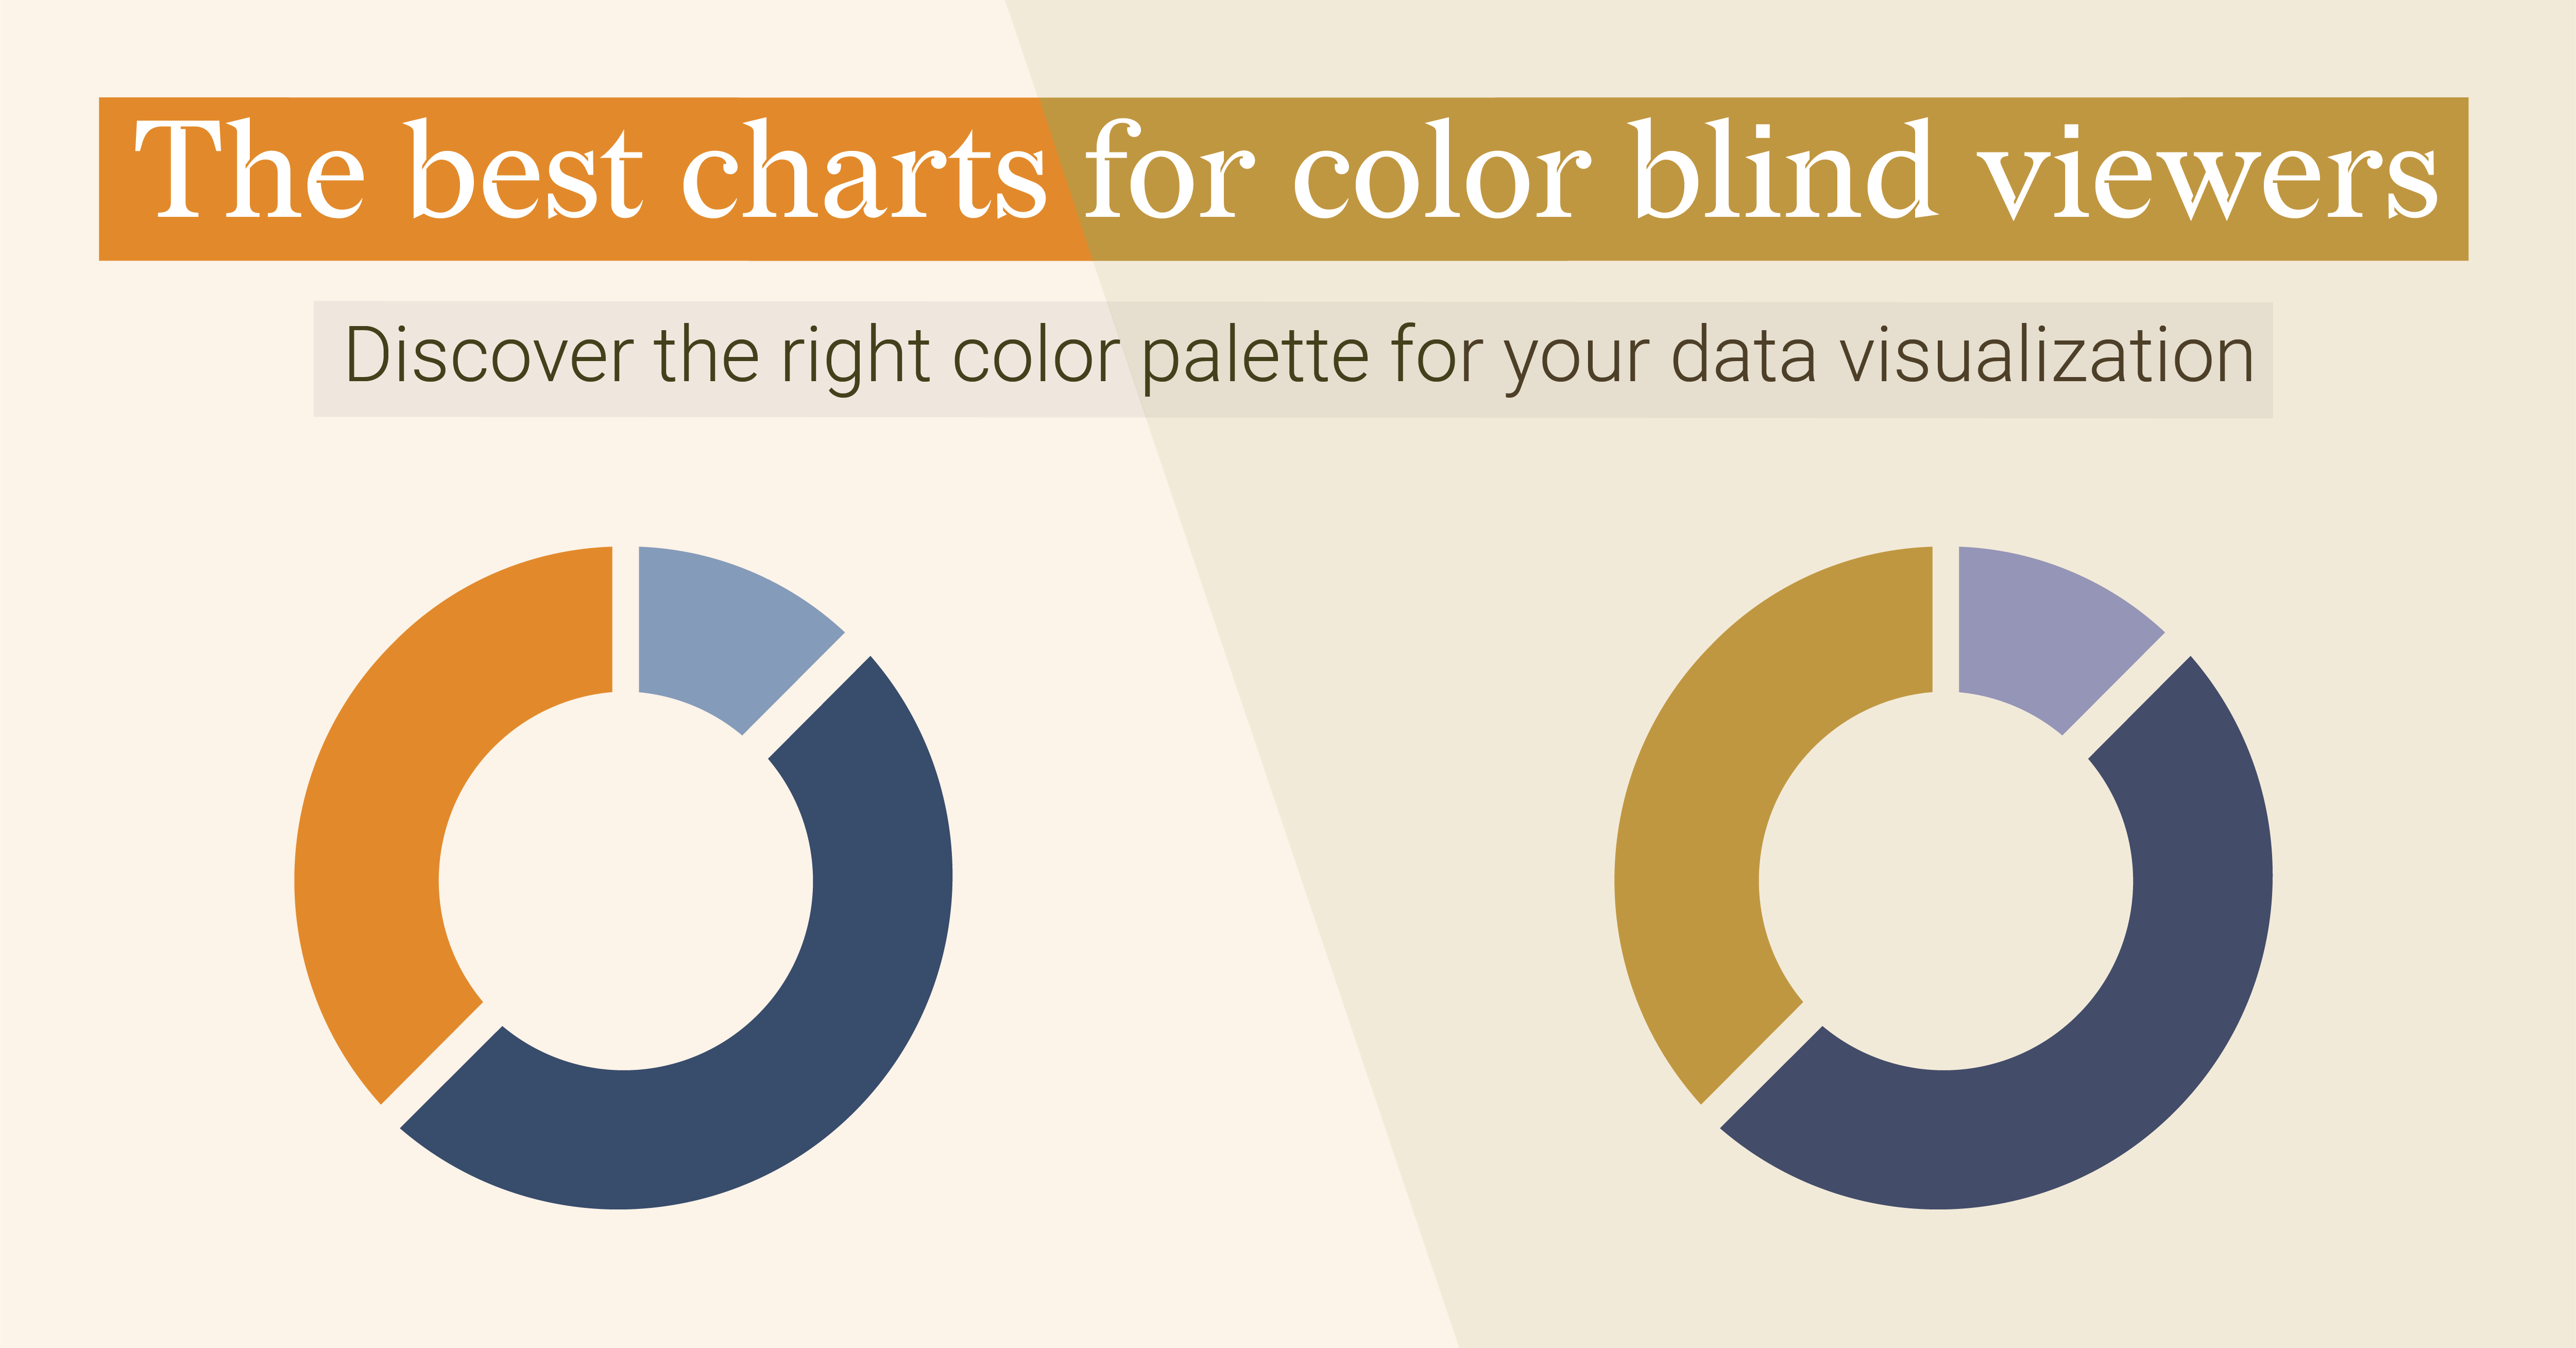 What color is most colorblind friendly?